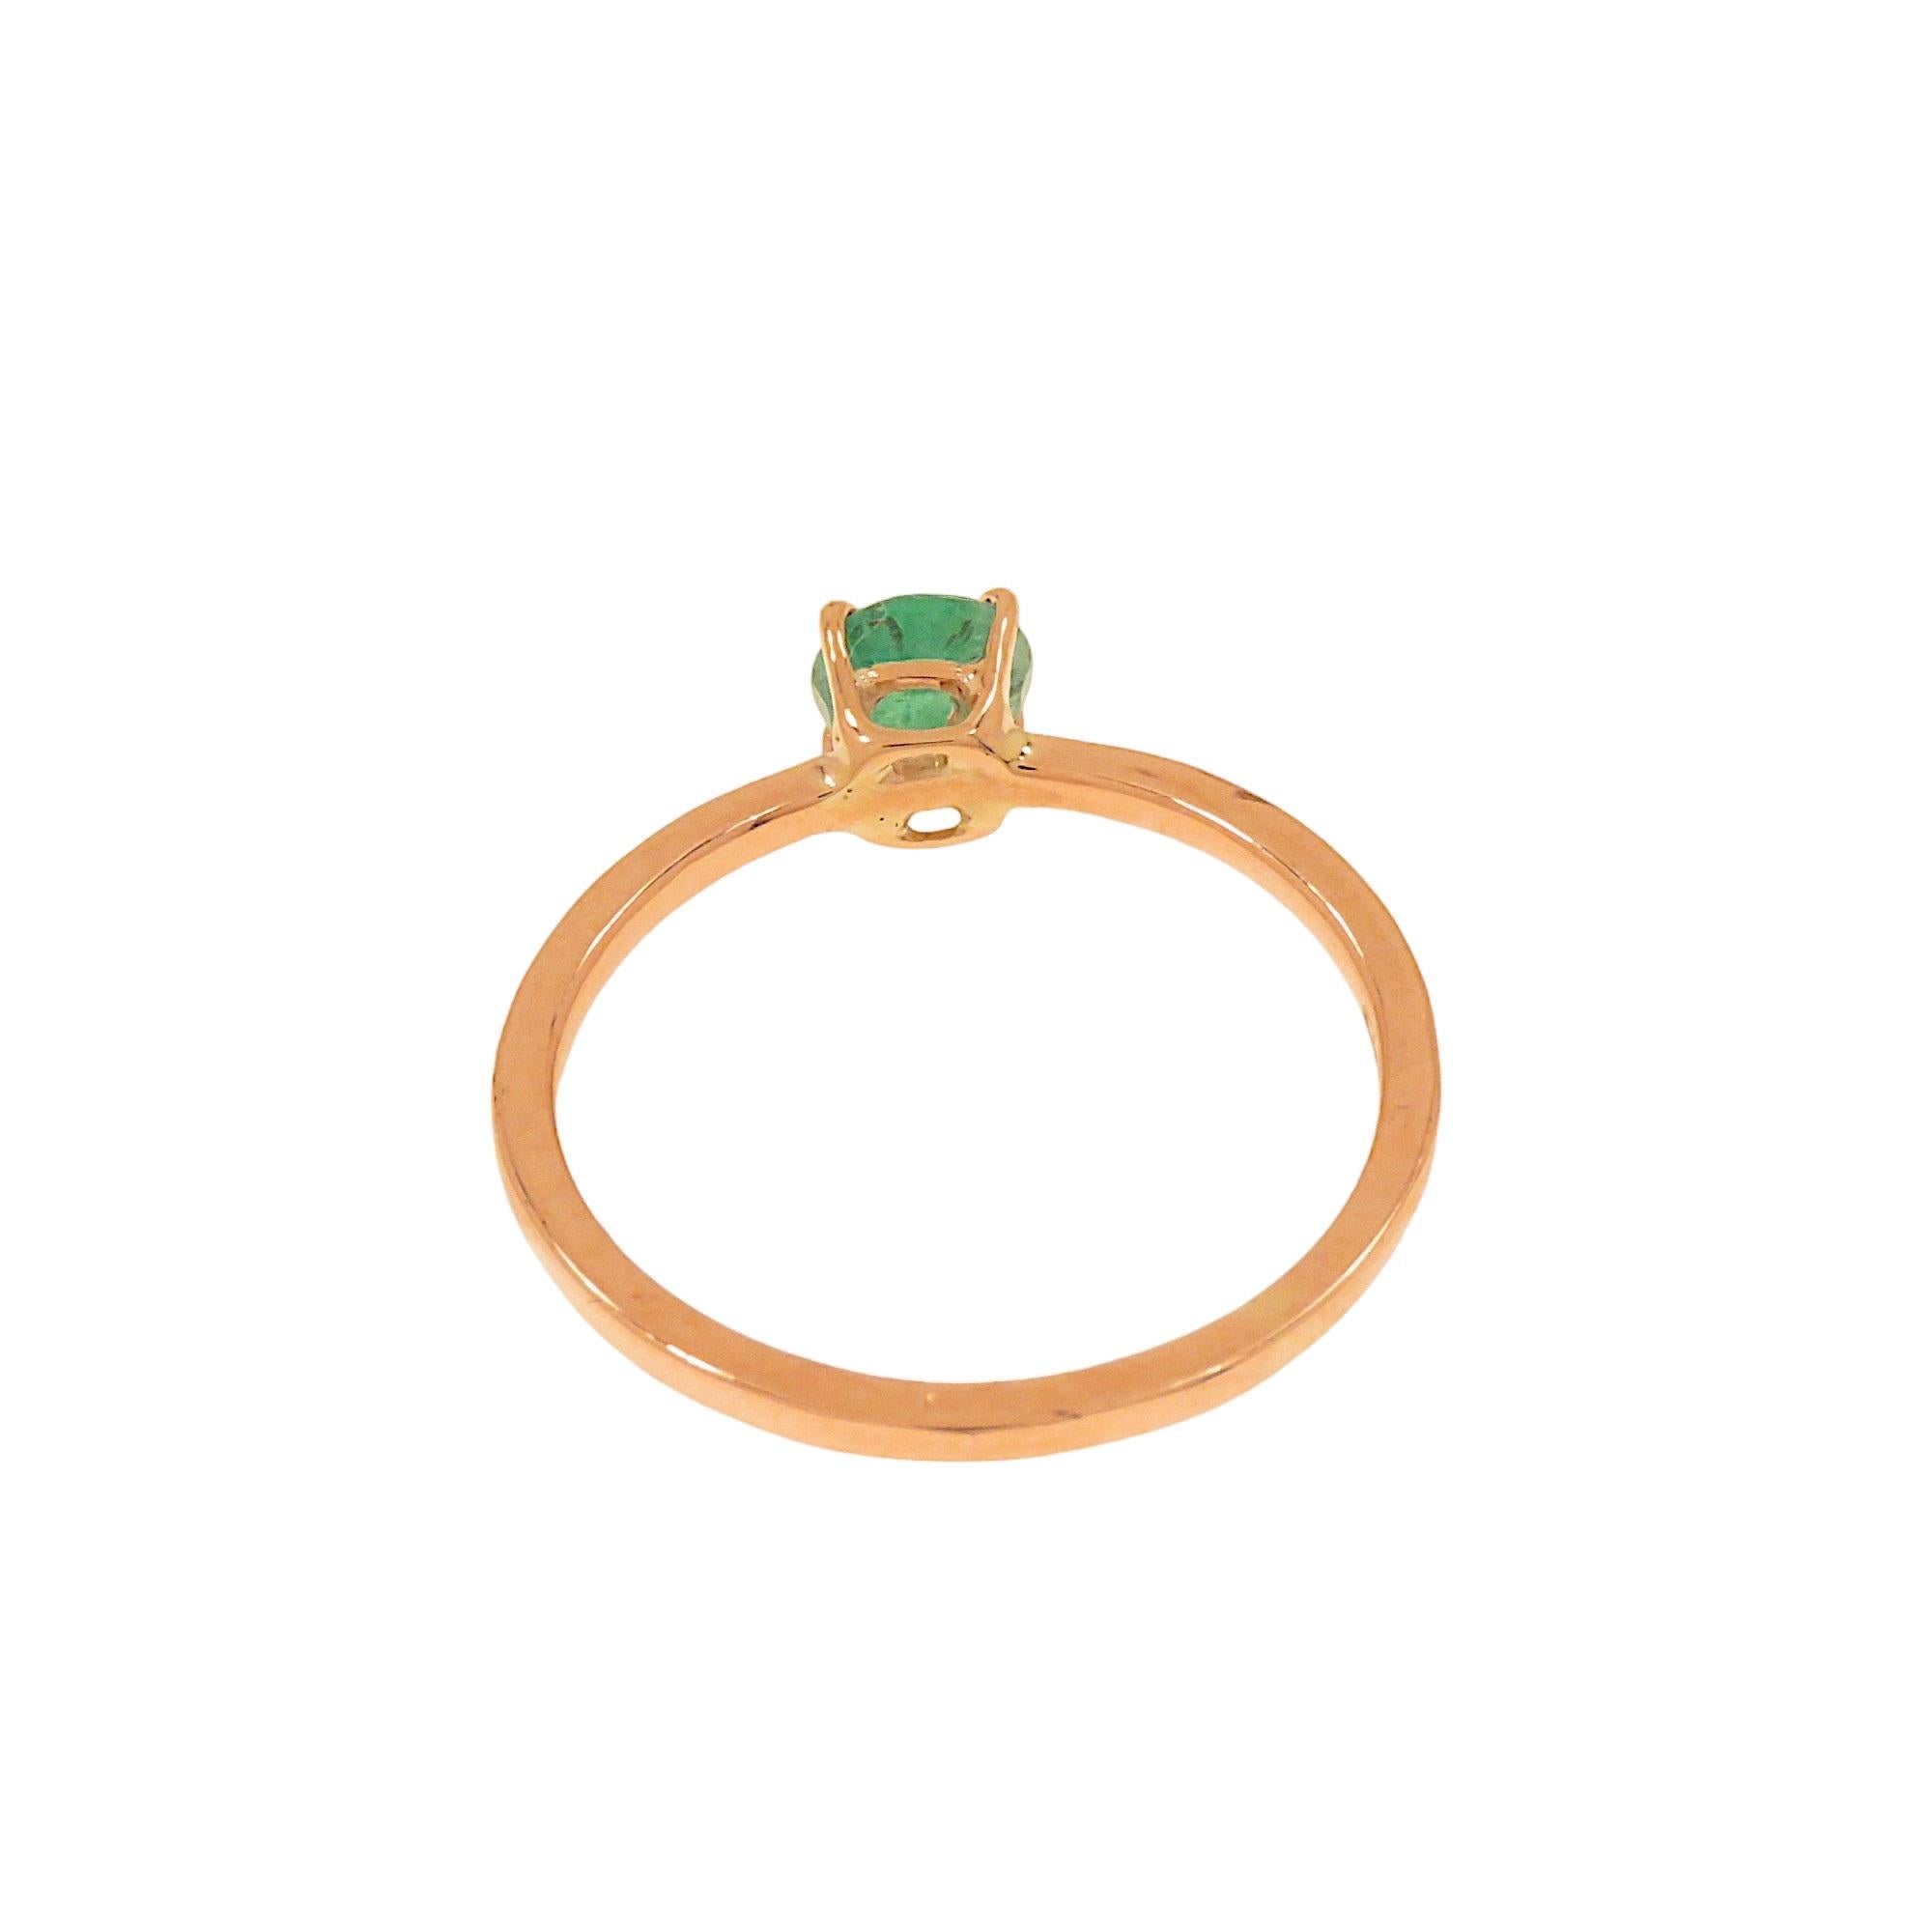 Botta jewelry rose gold emerald ring made in Italy For Sale 1